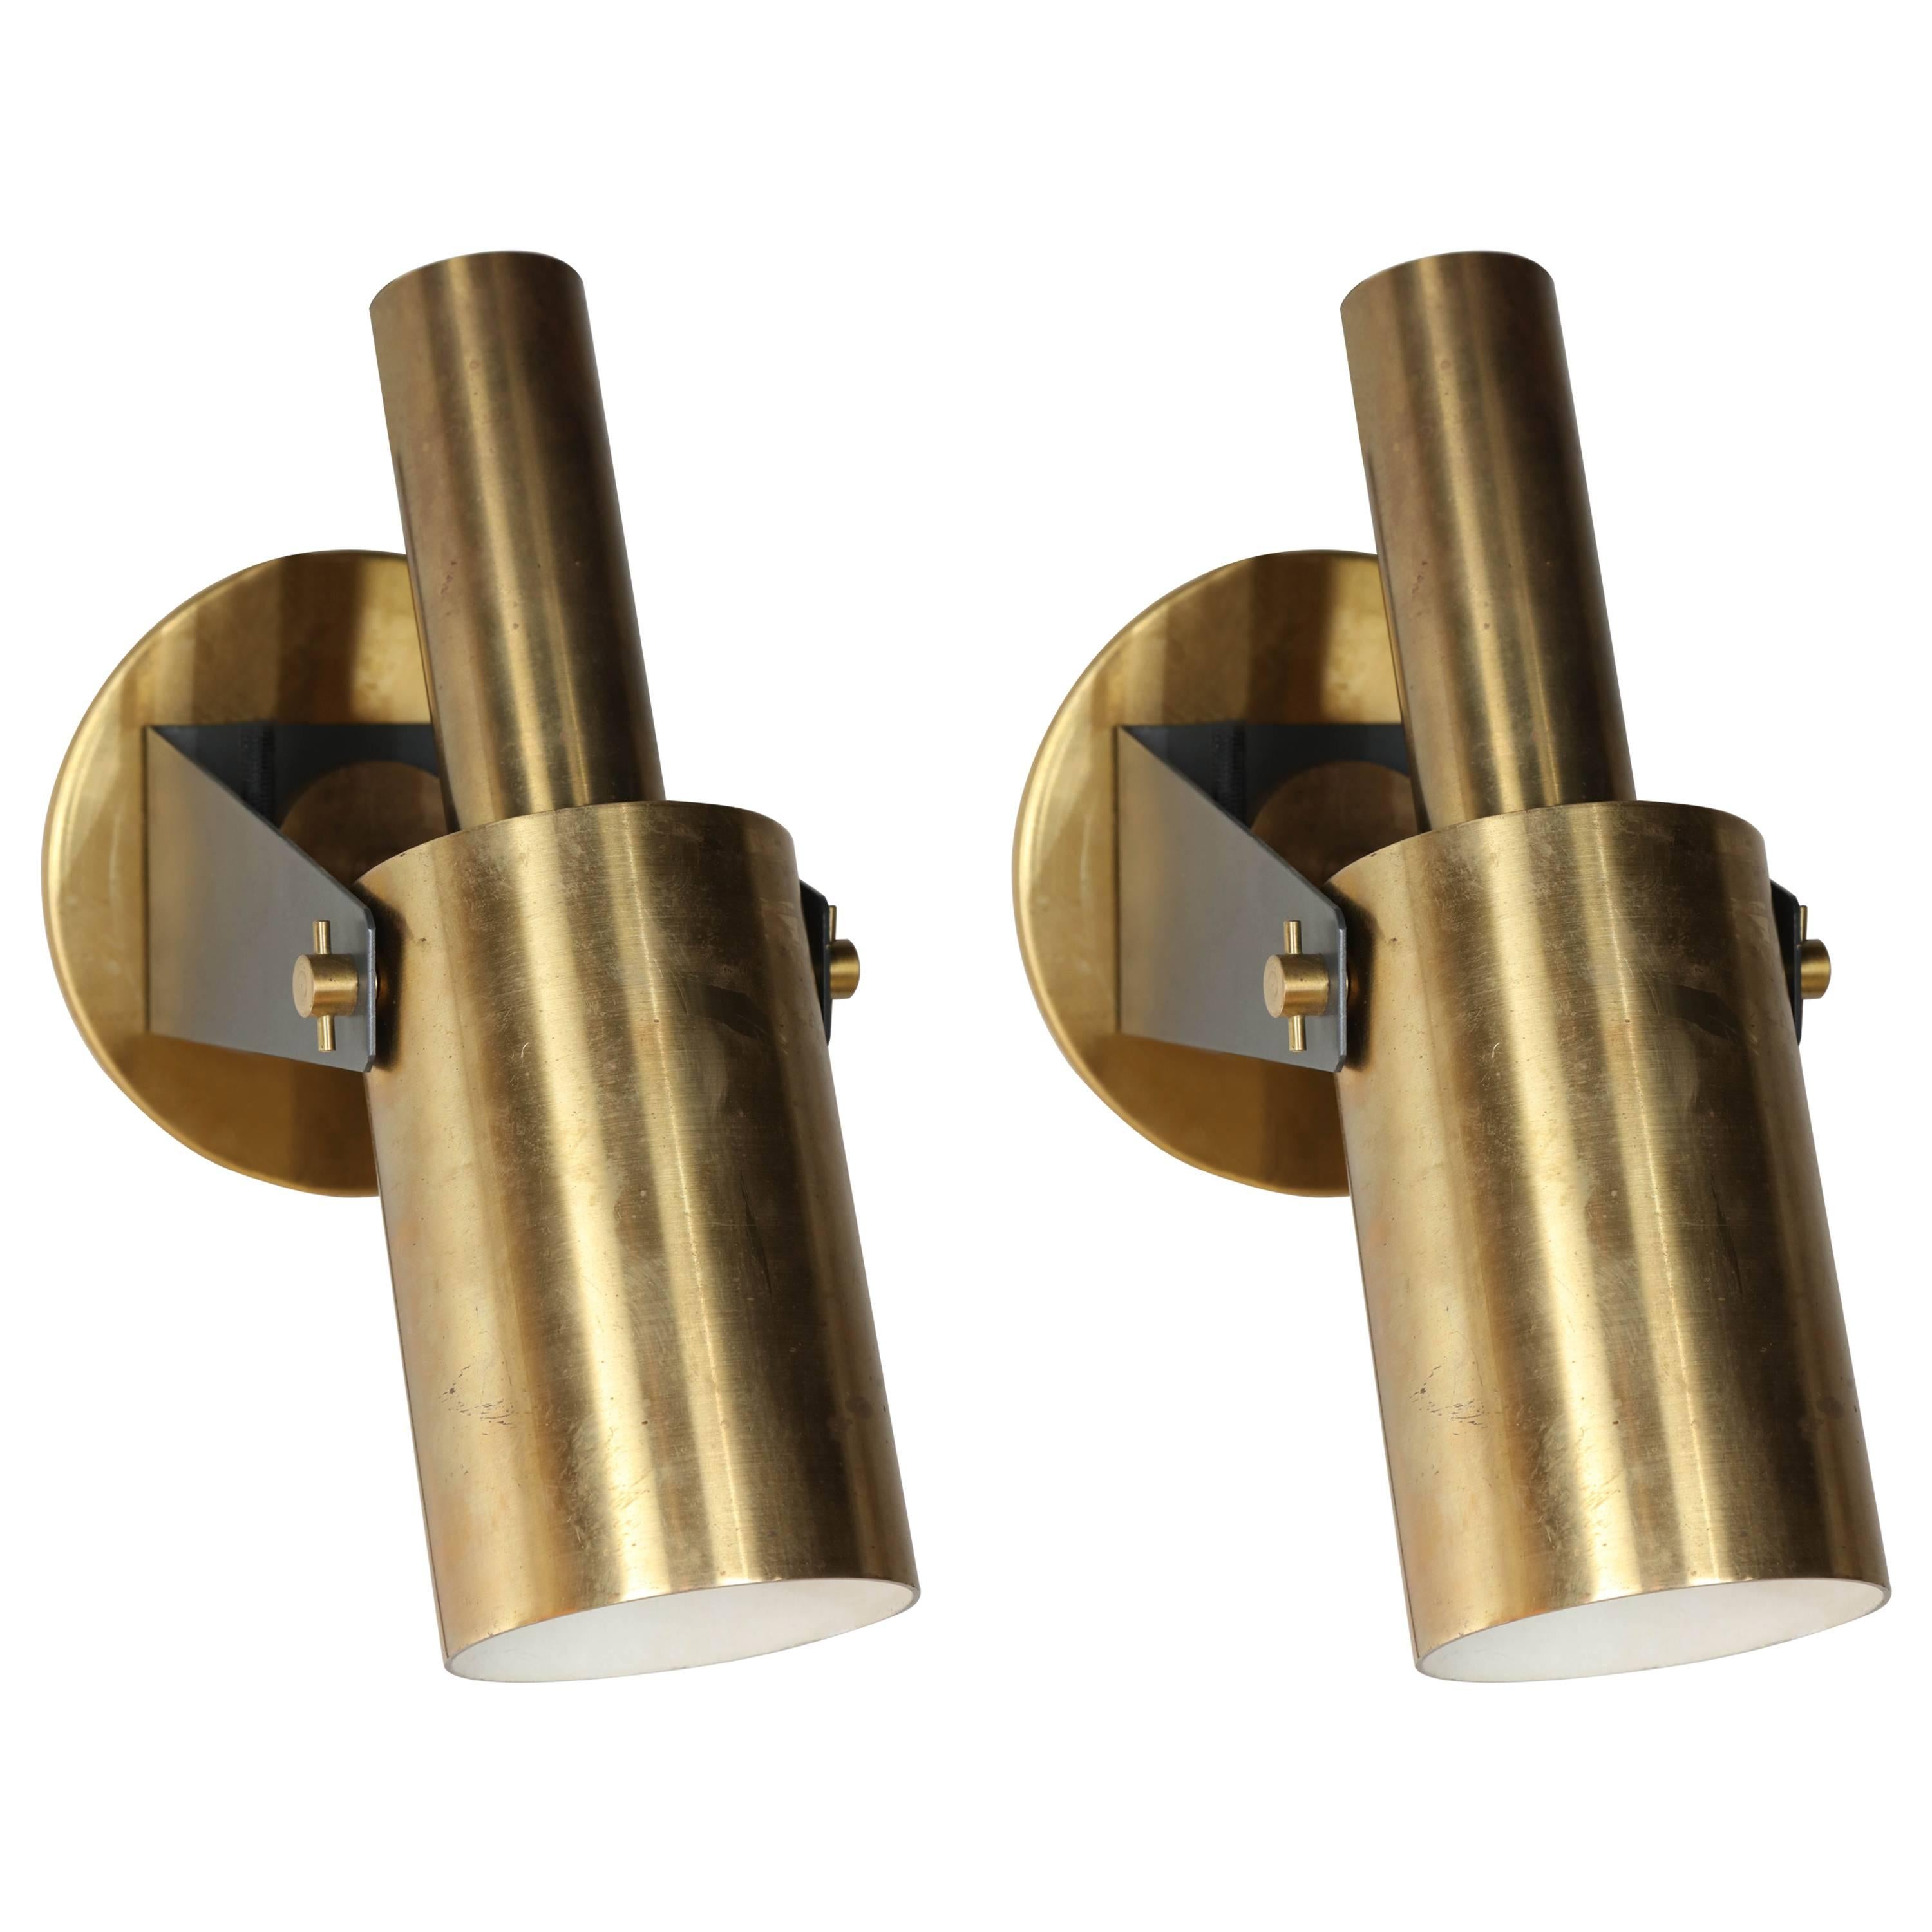 Pair of 1960s Italian Modern Articulating Brass Wall Sconce Reading Lamps